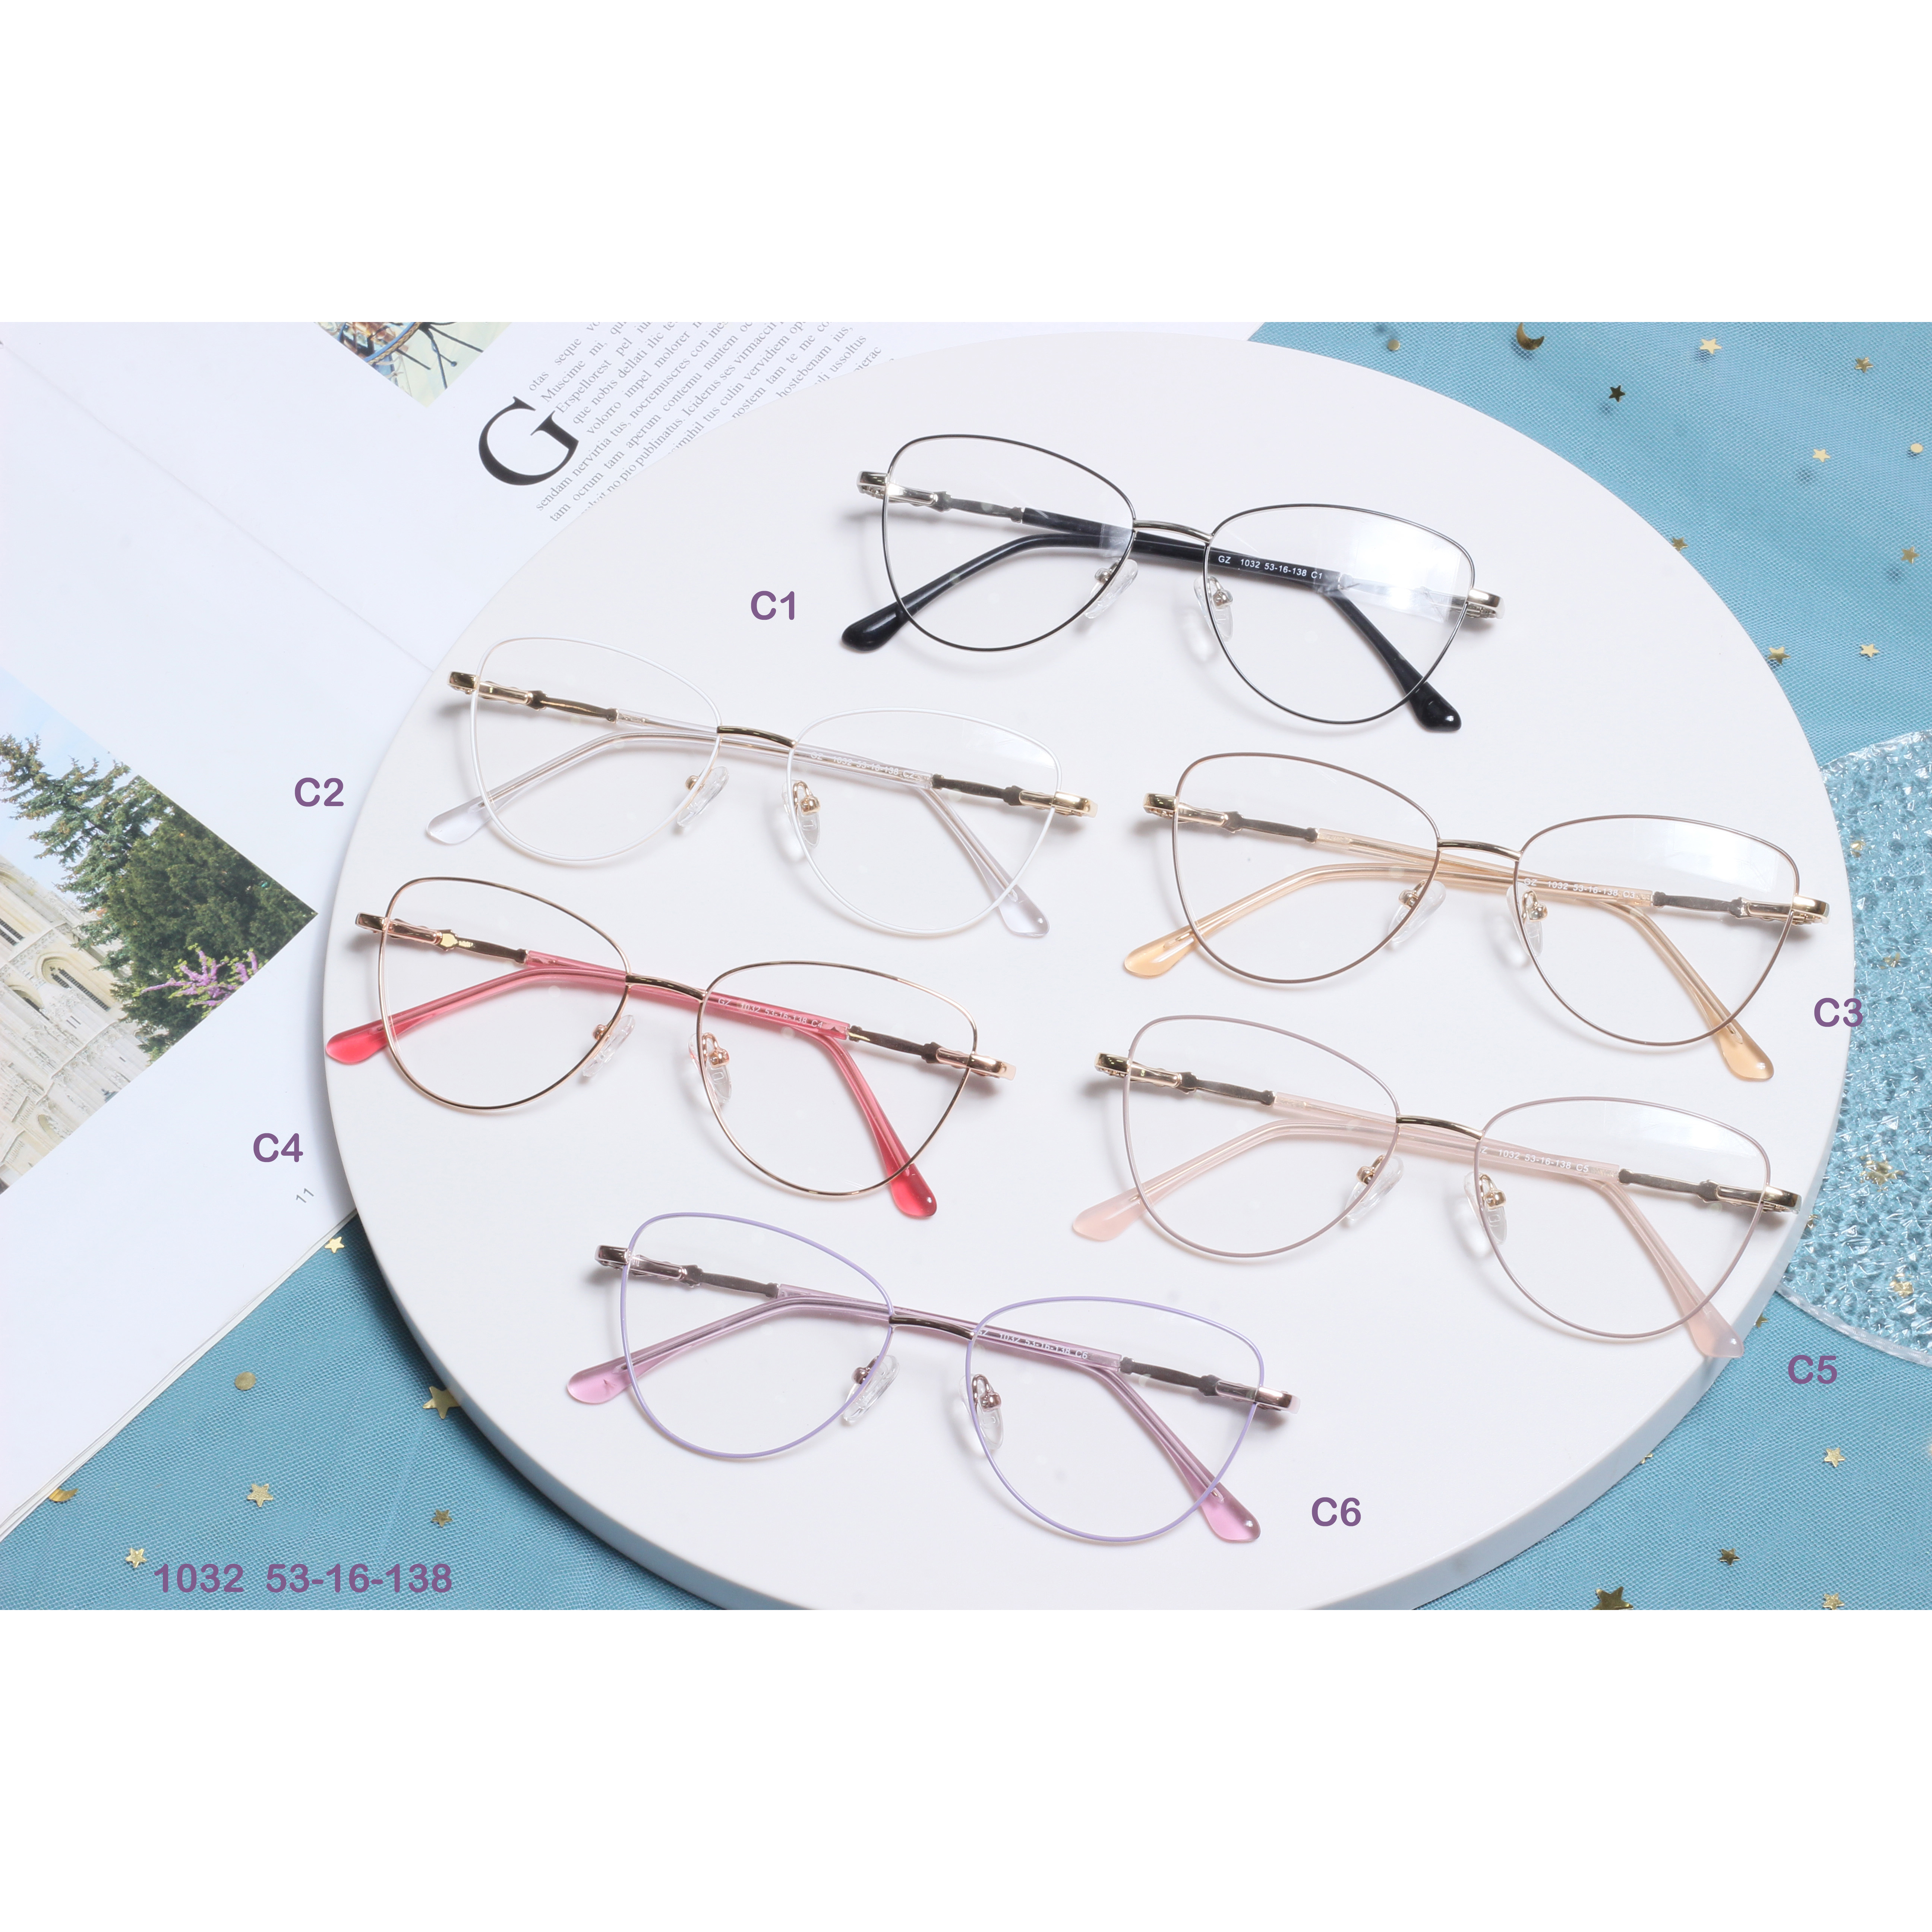 Eyeglasses Business Optical spectacle Frames In Stock